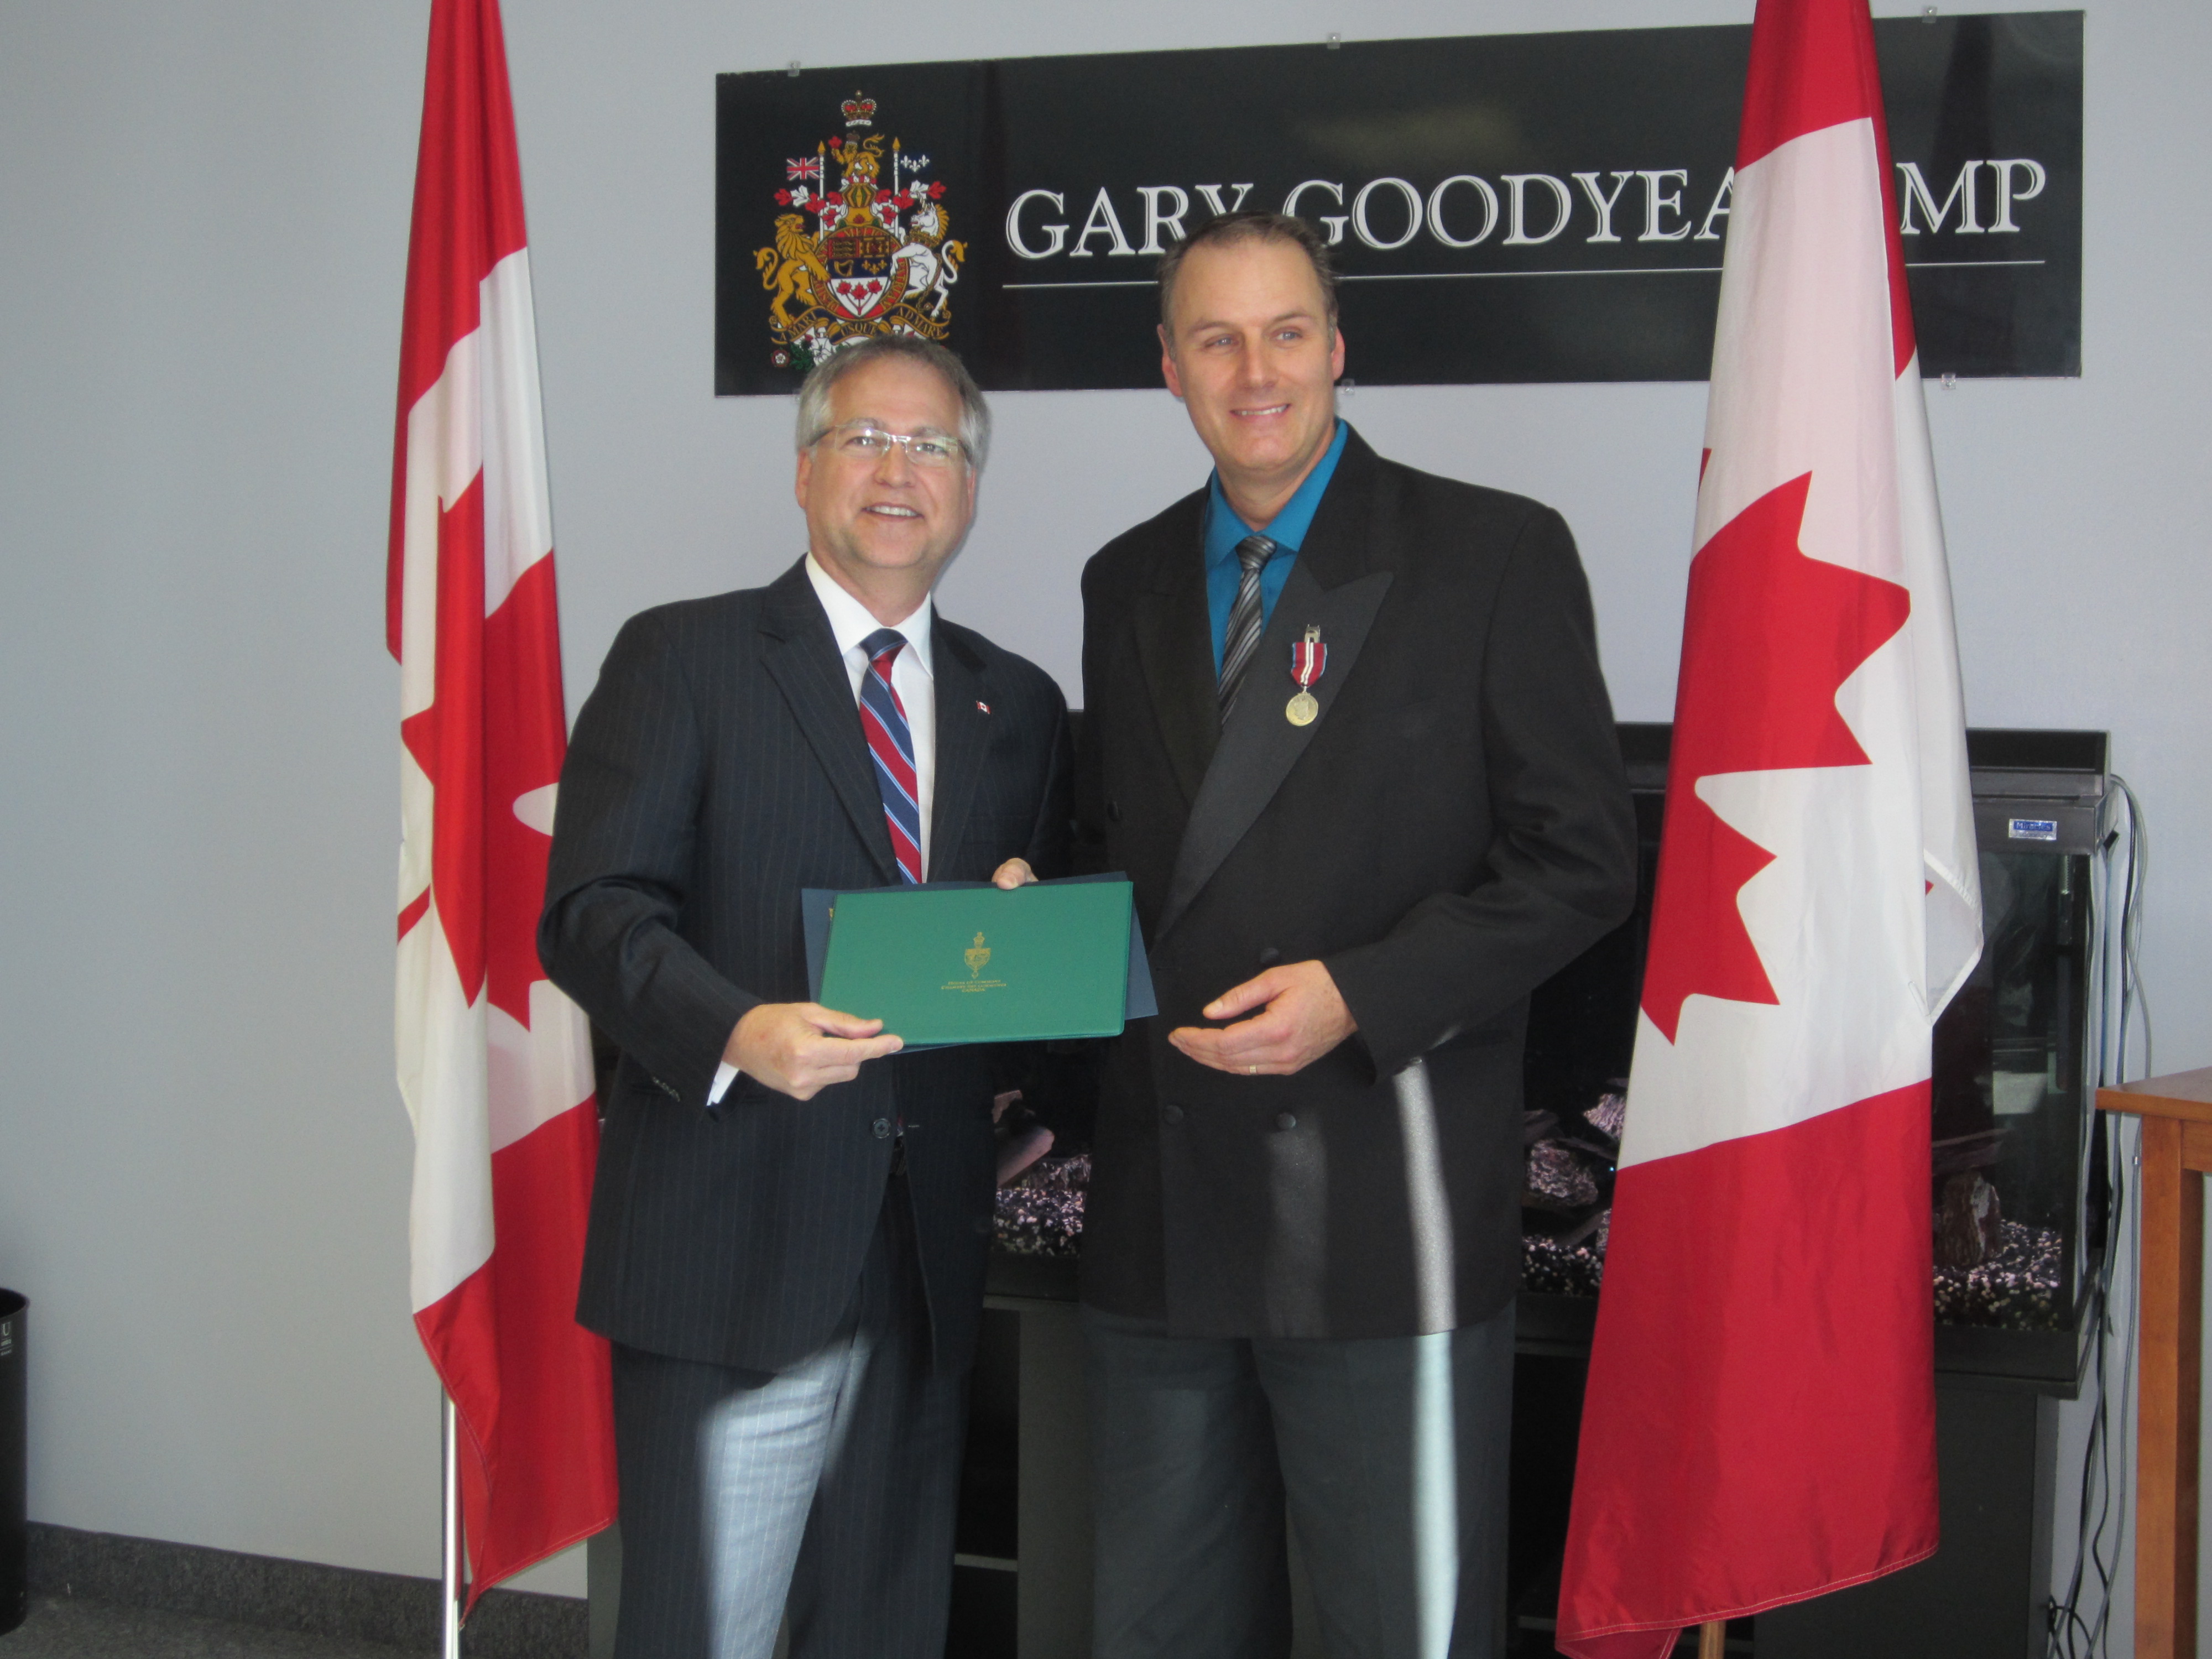 Dr. Paul Blaser being awarded the Jubilee medal from Gary Goodyear MP